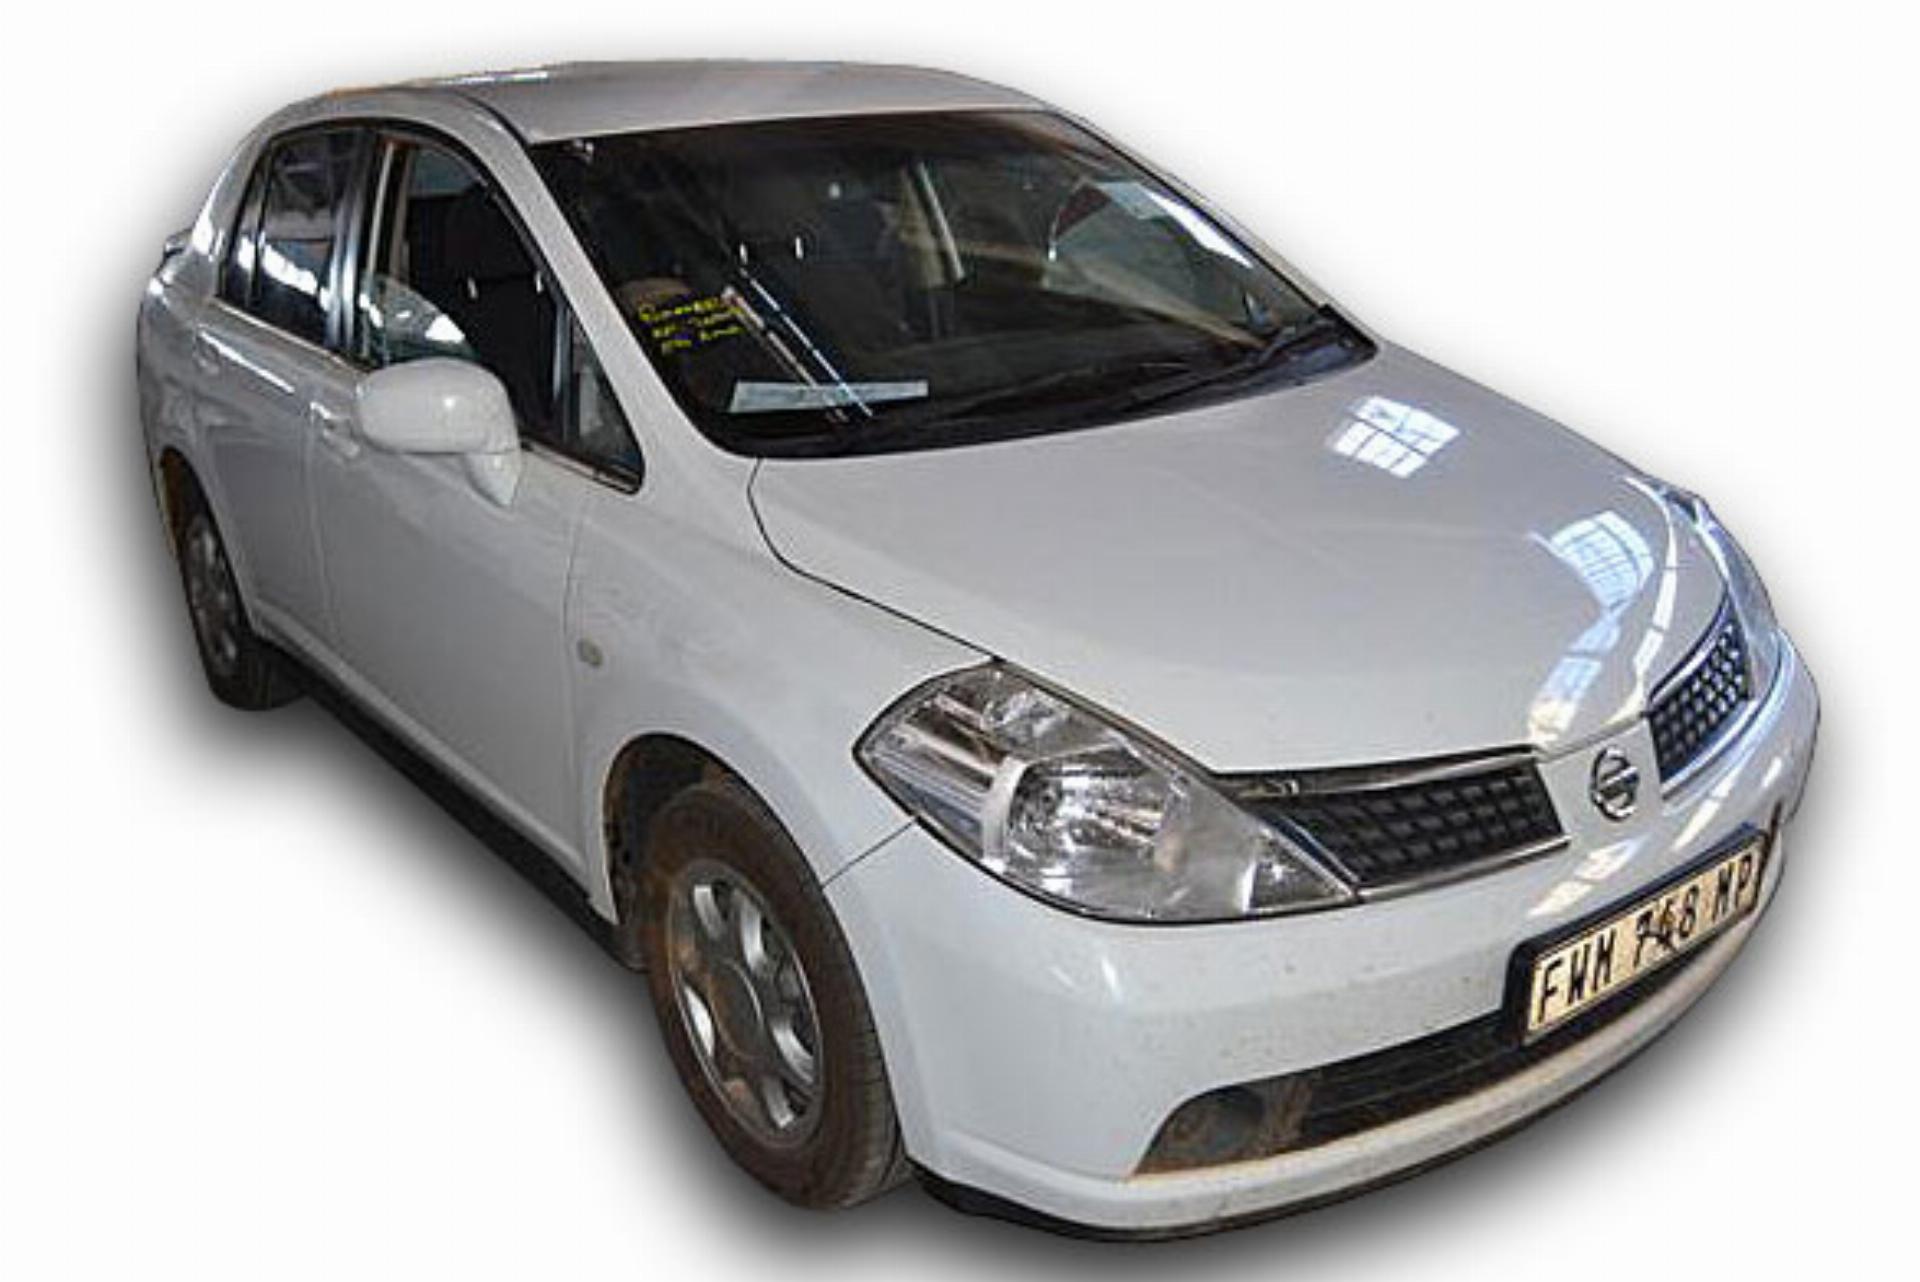 Repossessed Nissan Tiida 1.6 VISIA+ A/T 2010 on auction